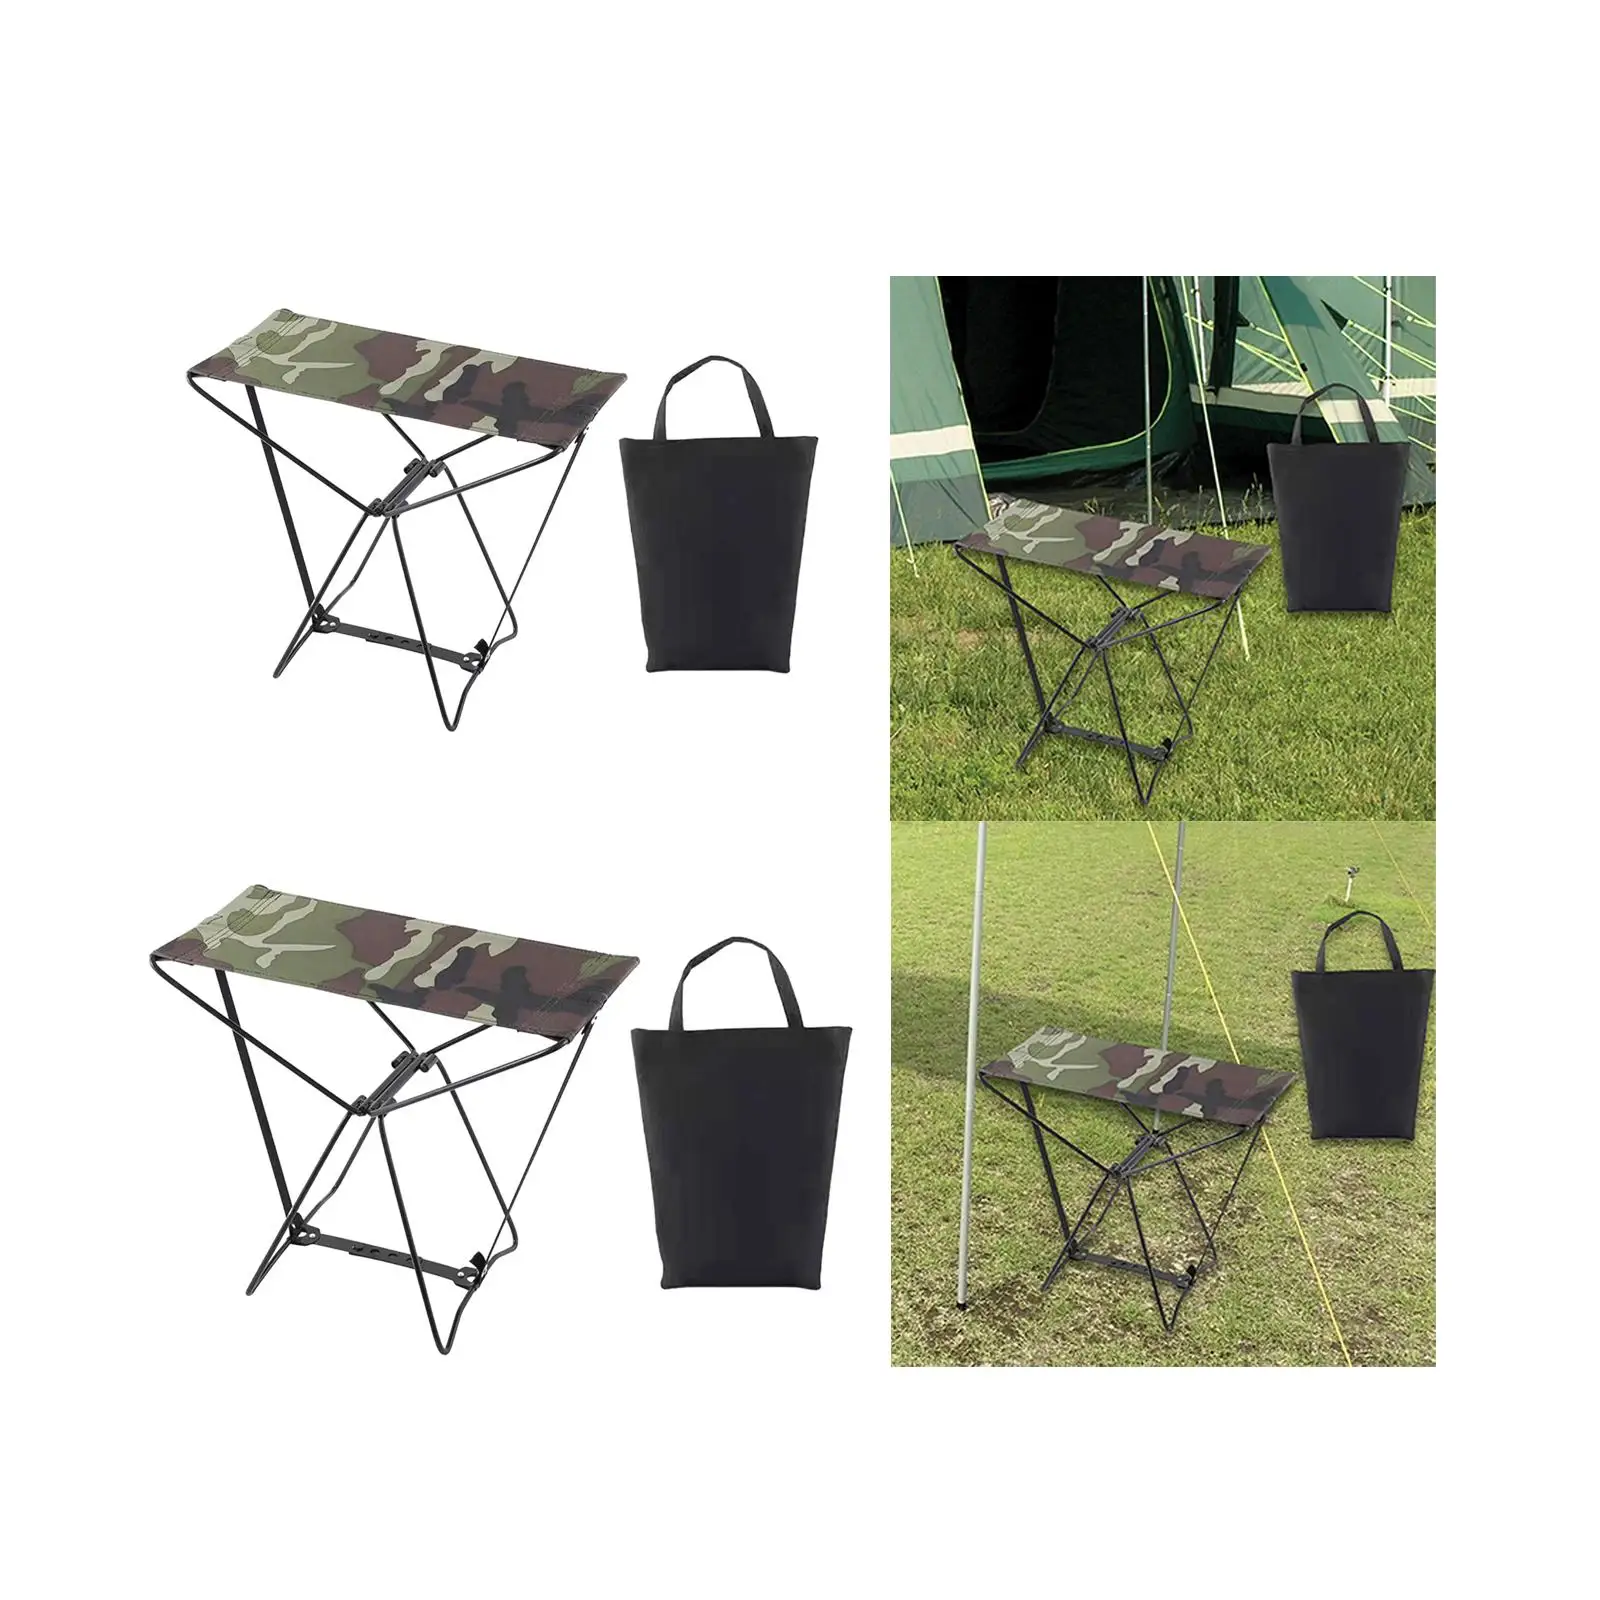 Folding Camping Stool Camp Stool Furniture Compact Outside Camping Chair Collapsible Stool for Backyard Beach Yard Picnic